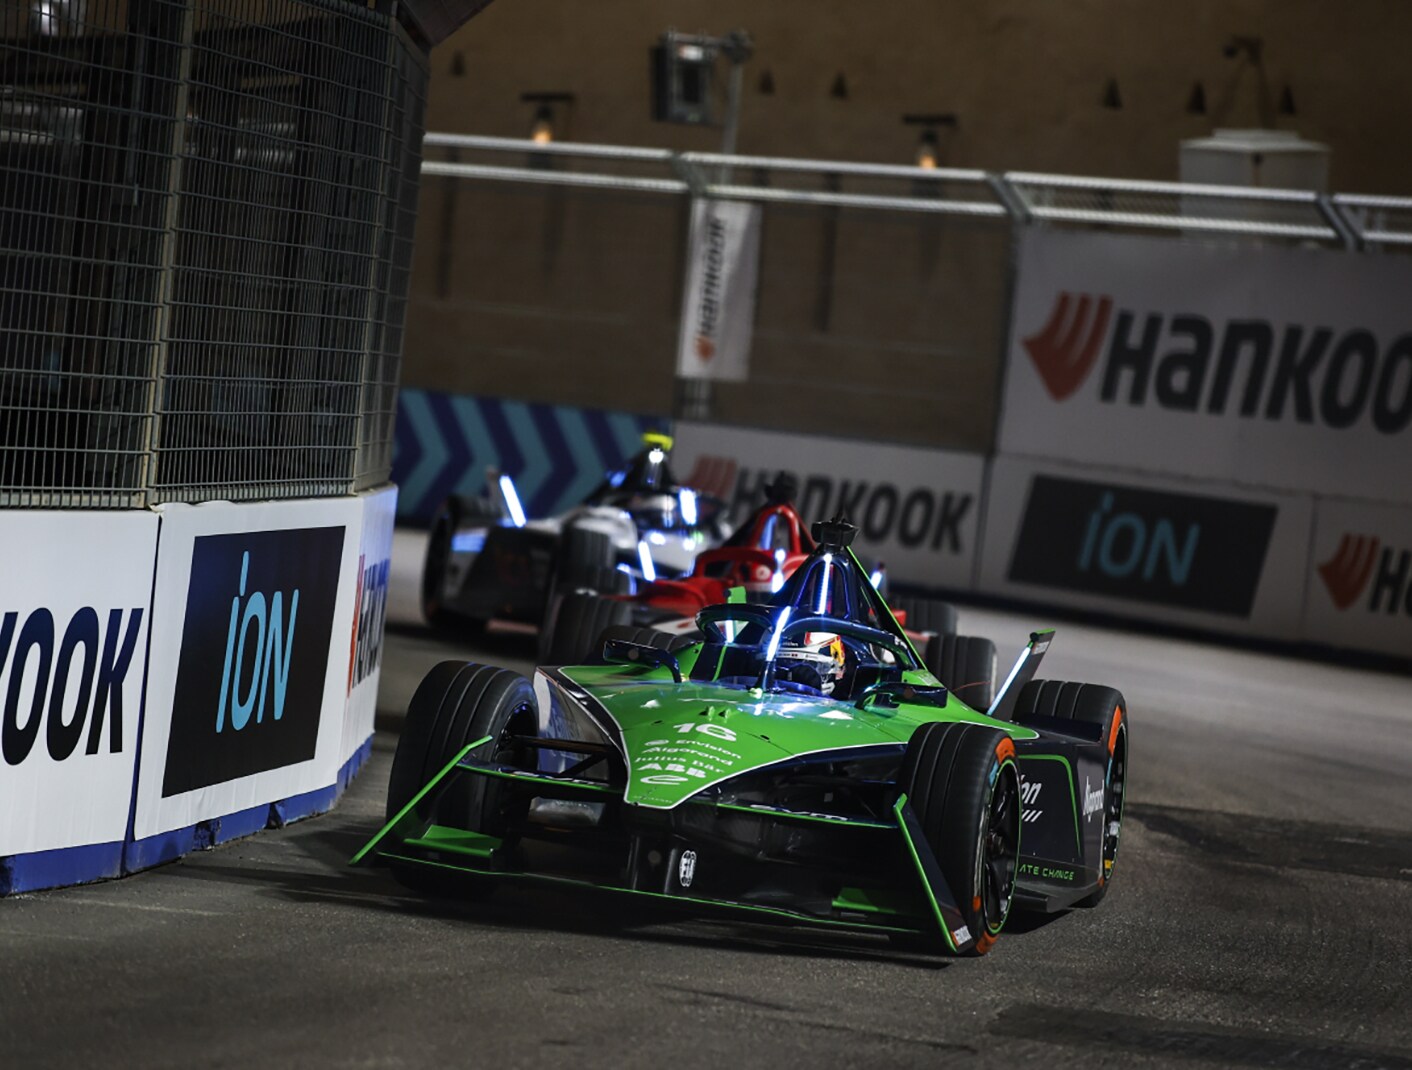 The heat is on for the Hankook iON Race – it’s off to India for the Hyderabad E-Prix